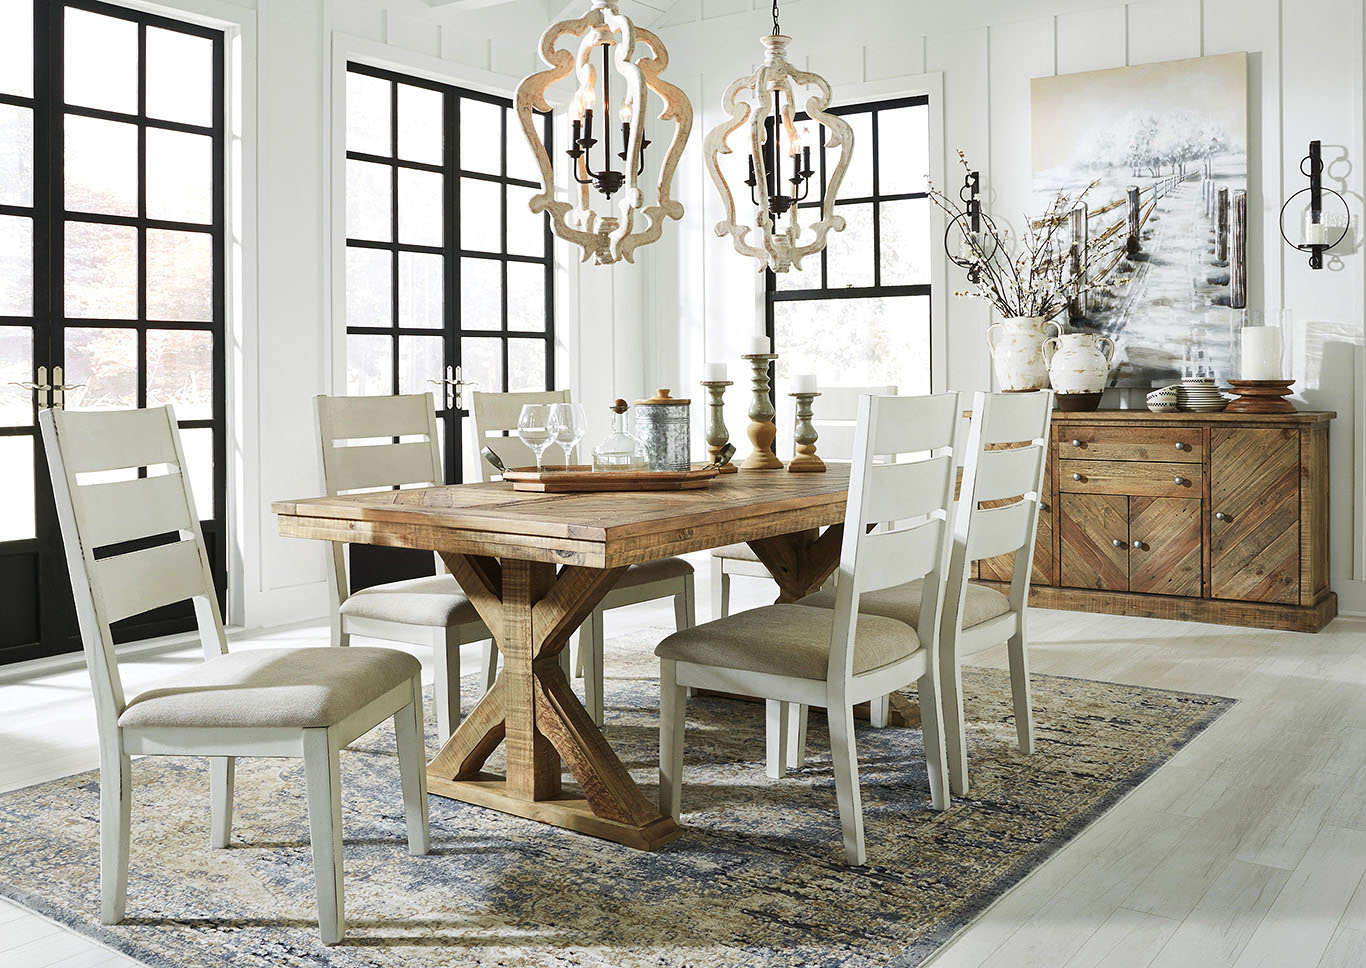 Grindleburg Rectangular Dining Room Table Ashley Furniture Homestore Independently Owned And Operated By Johnny S Furniture Group